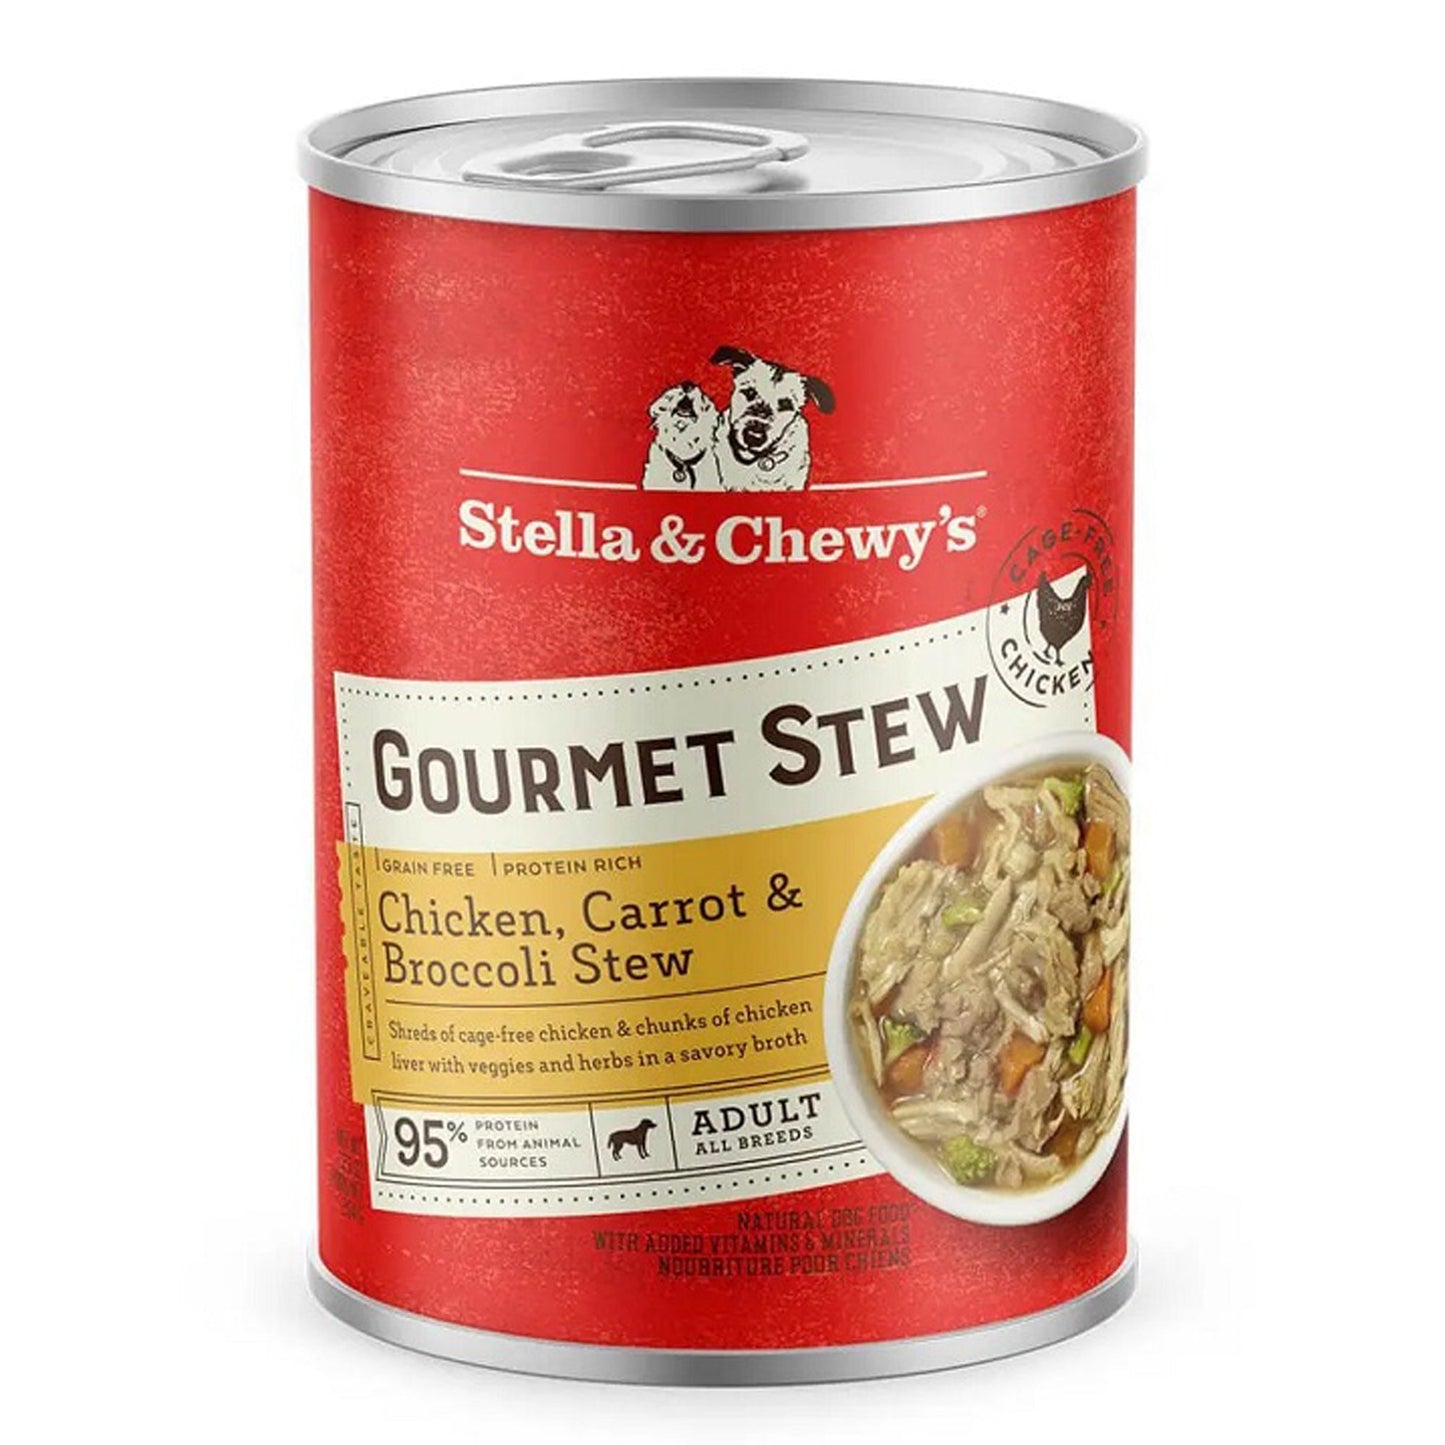 Stella And Chewys Dog Gourmet Stew Chicken; Carrot And Broccoli 12.5oz. (Case of 12)